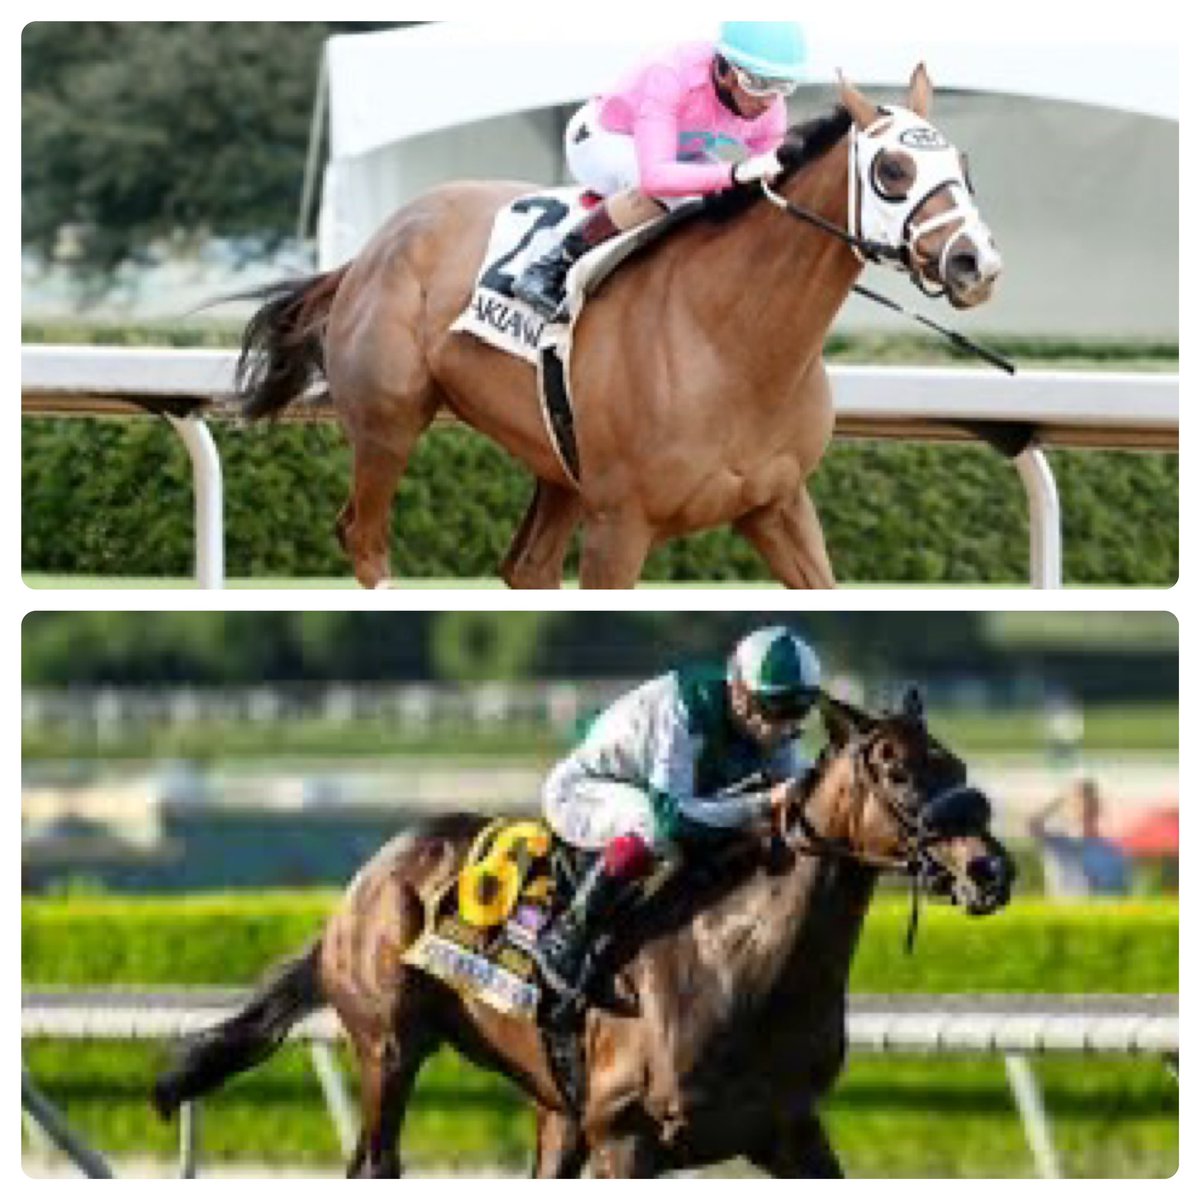 Big weekend coming up. Hopefully the turf holds up @keeneland for DIDIA (bottom) in the Jenny Wiley Stakes @keenelandracing and MISTY VEIL (top) in the Apple Blossom Stakes @OaklawnPark this Saturday. 
@keenelandsales